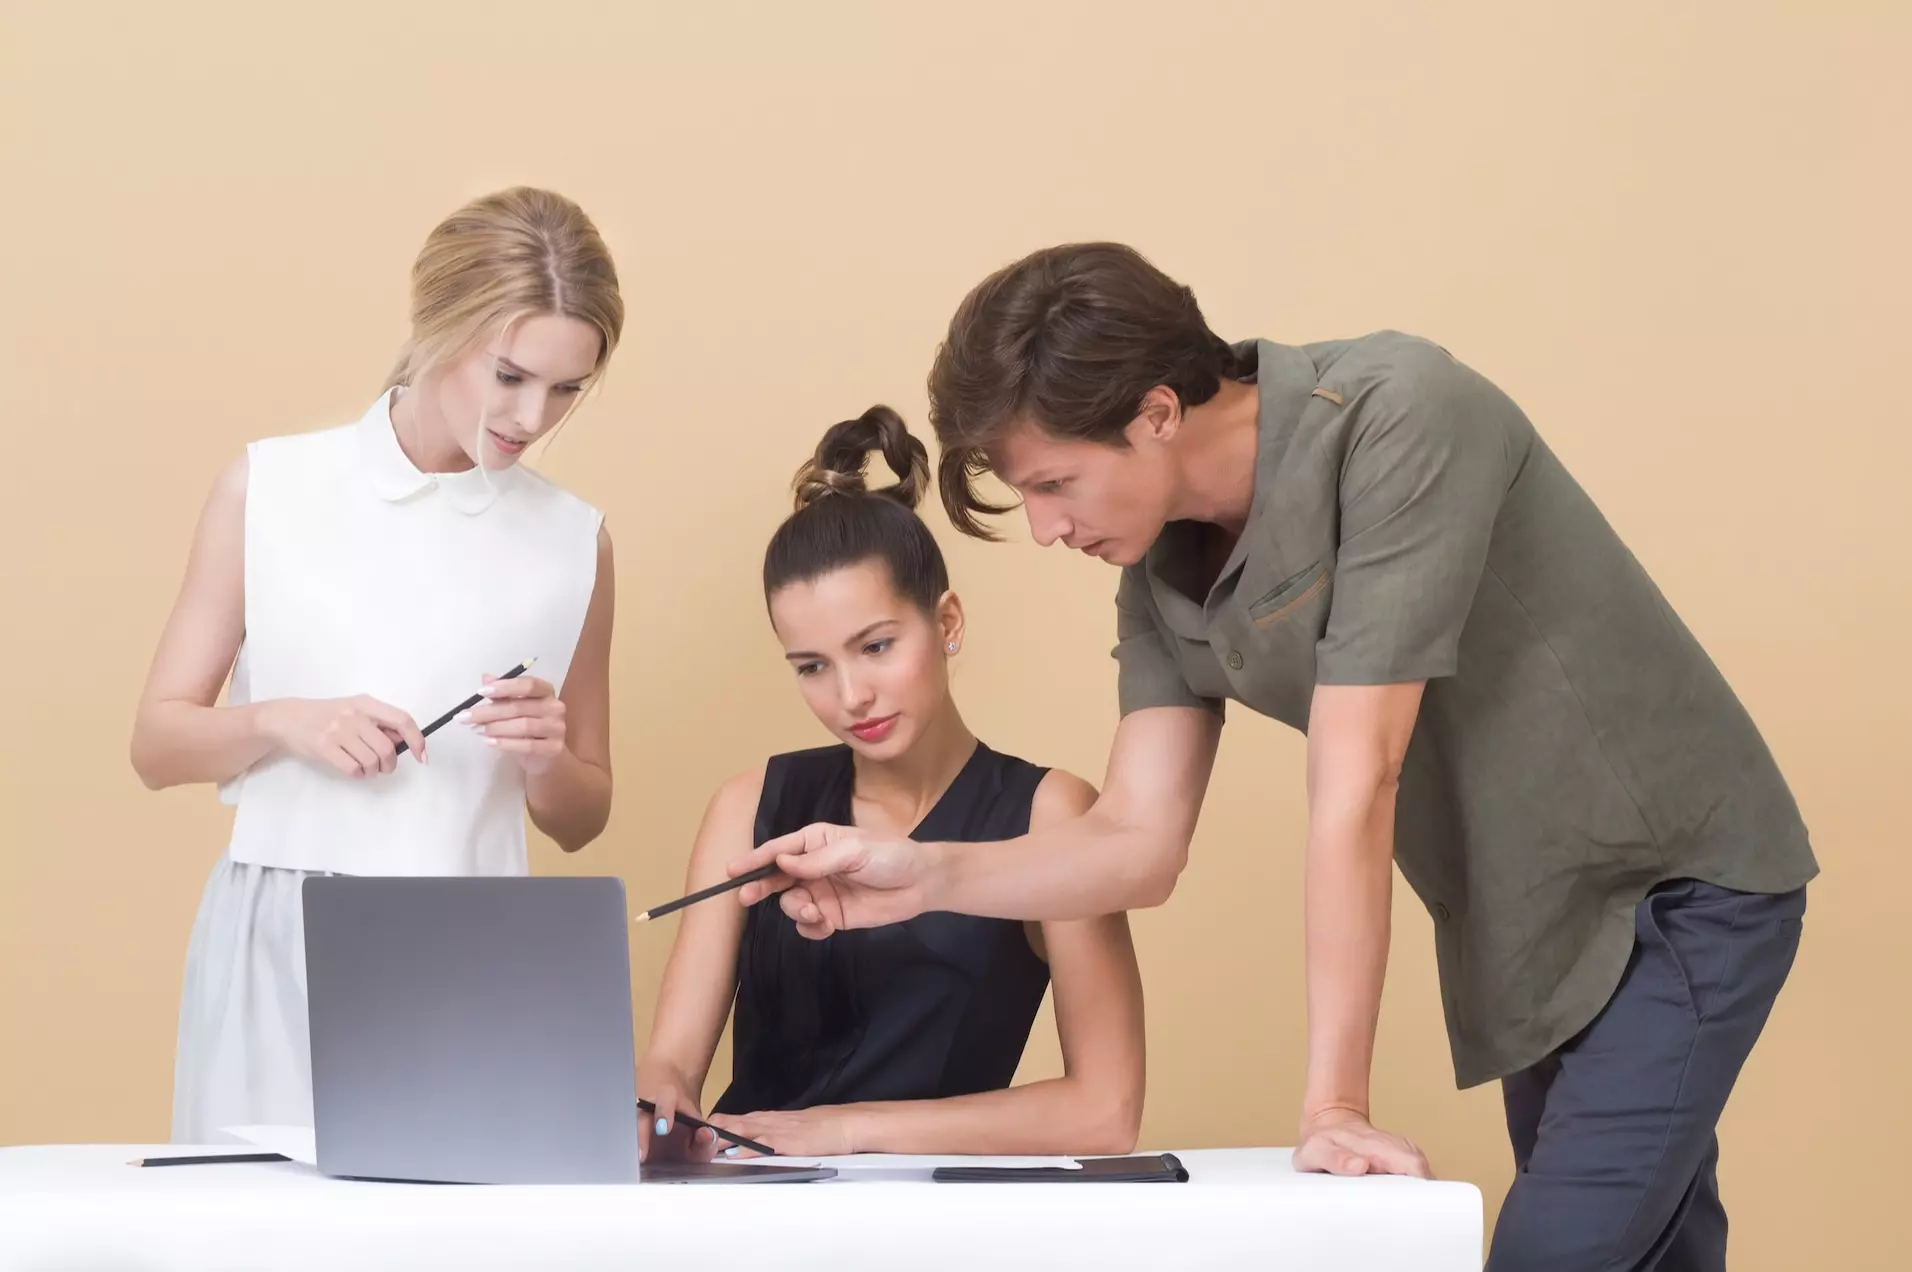 two girls and a man looking at a laptop